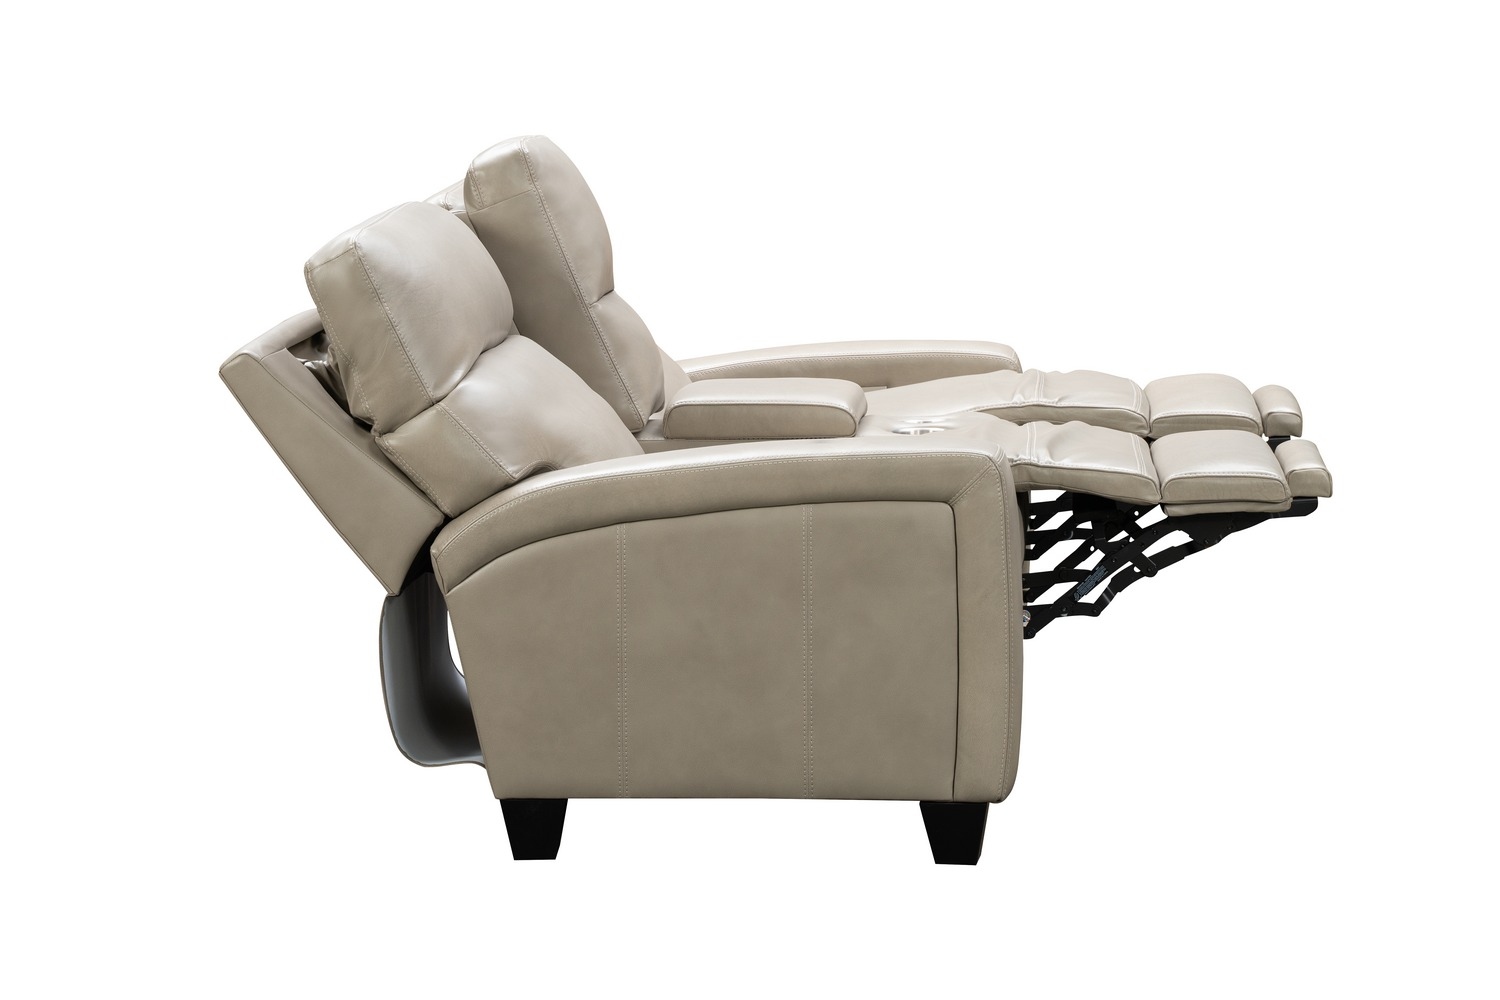 Barcalounger Macello Power Reclining Console Loveseat with Power Head Rests and Power Lumbar - Sergi Gray Beige/Leather Match